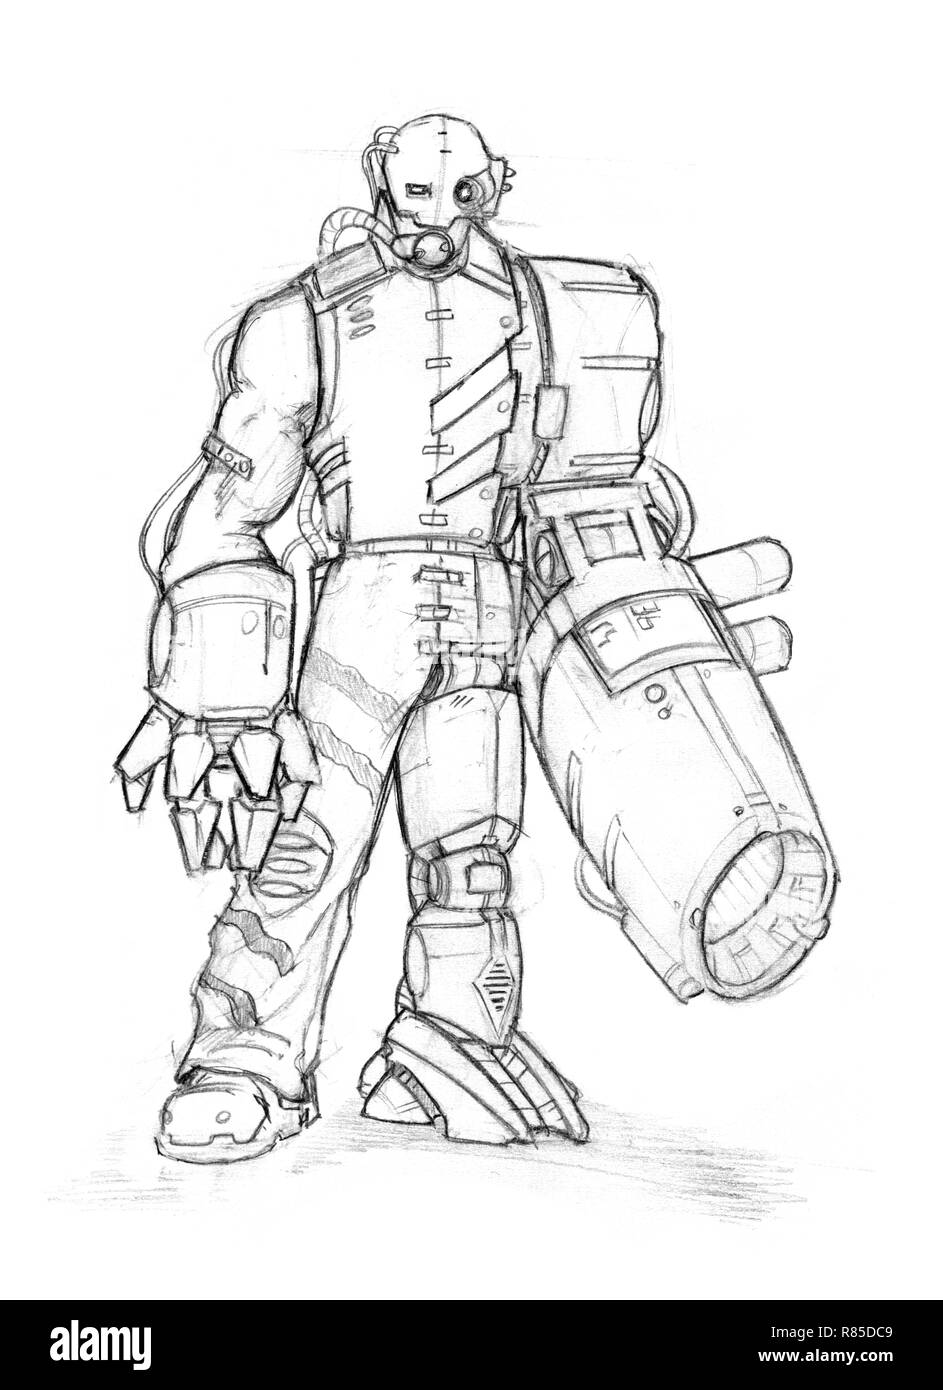 Black Grunge Rough Pencil Sketch of Cyborg With Gun Instead of Hand Stock Photo